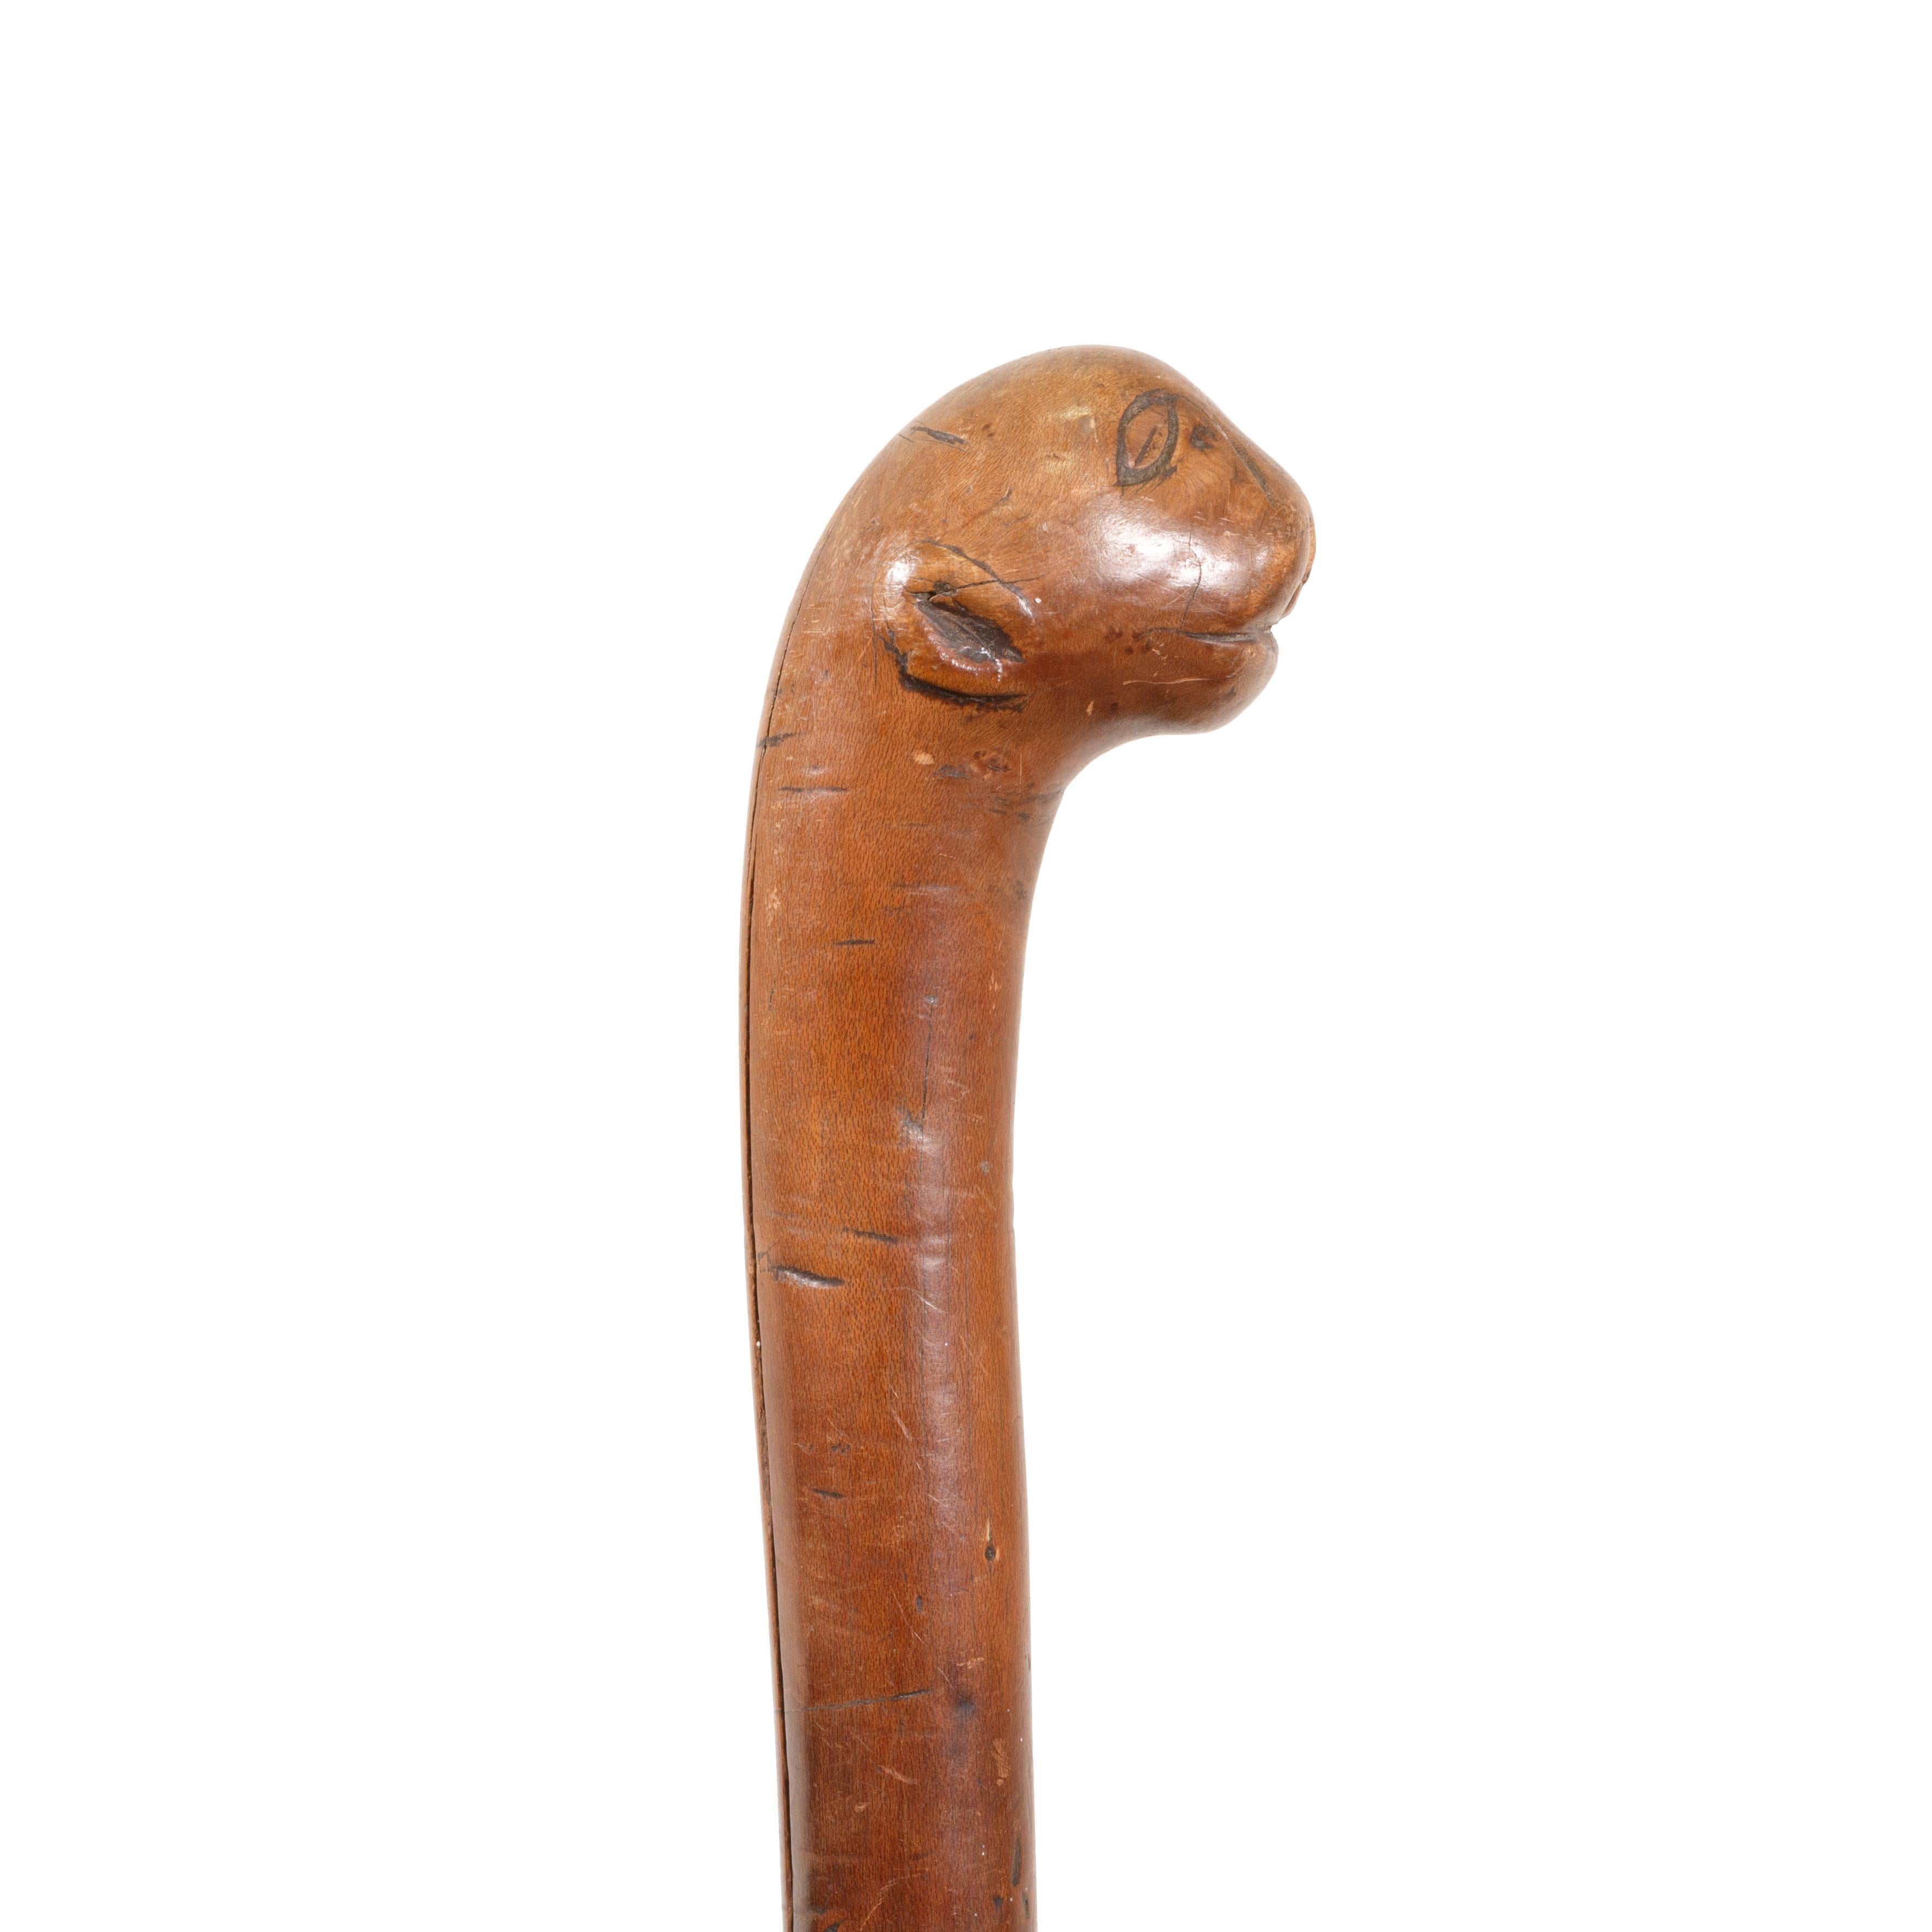 Northeast carved effigy cane with otter head. Patina plus. Ex John Behnken. 

Period: Mid-19th century or earlier

Origin: Northeast US

Size: 35